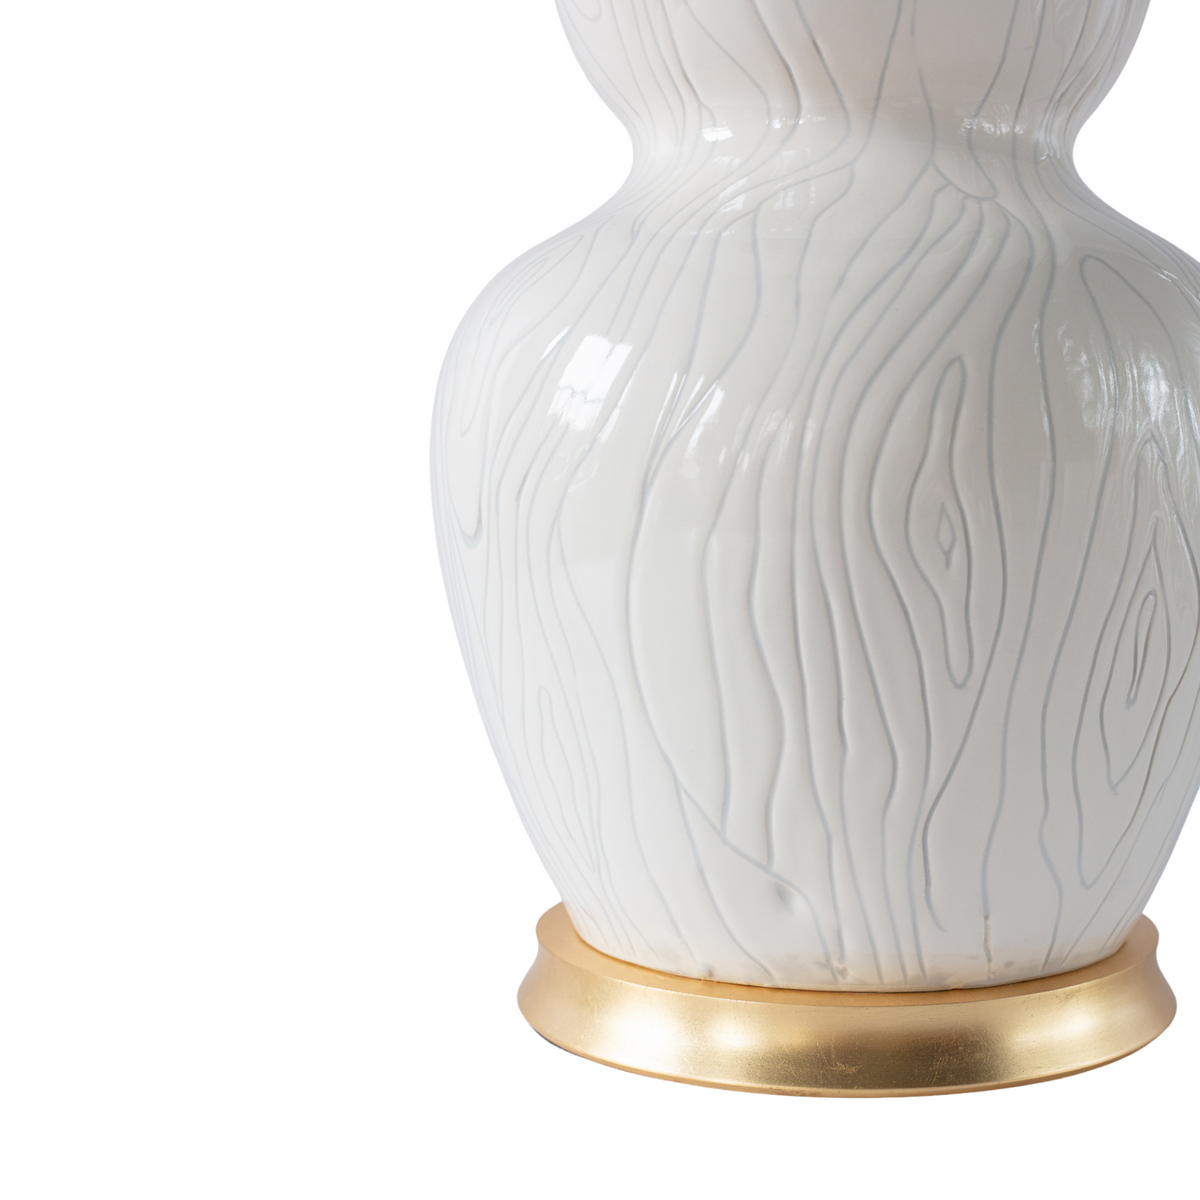 Harbin Faux Bois in Greige Incised White on a Gold Stand